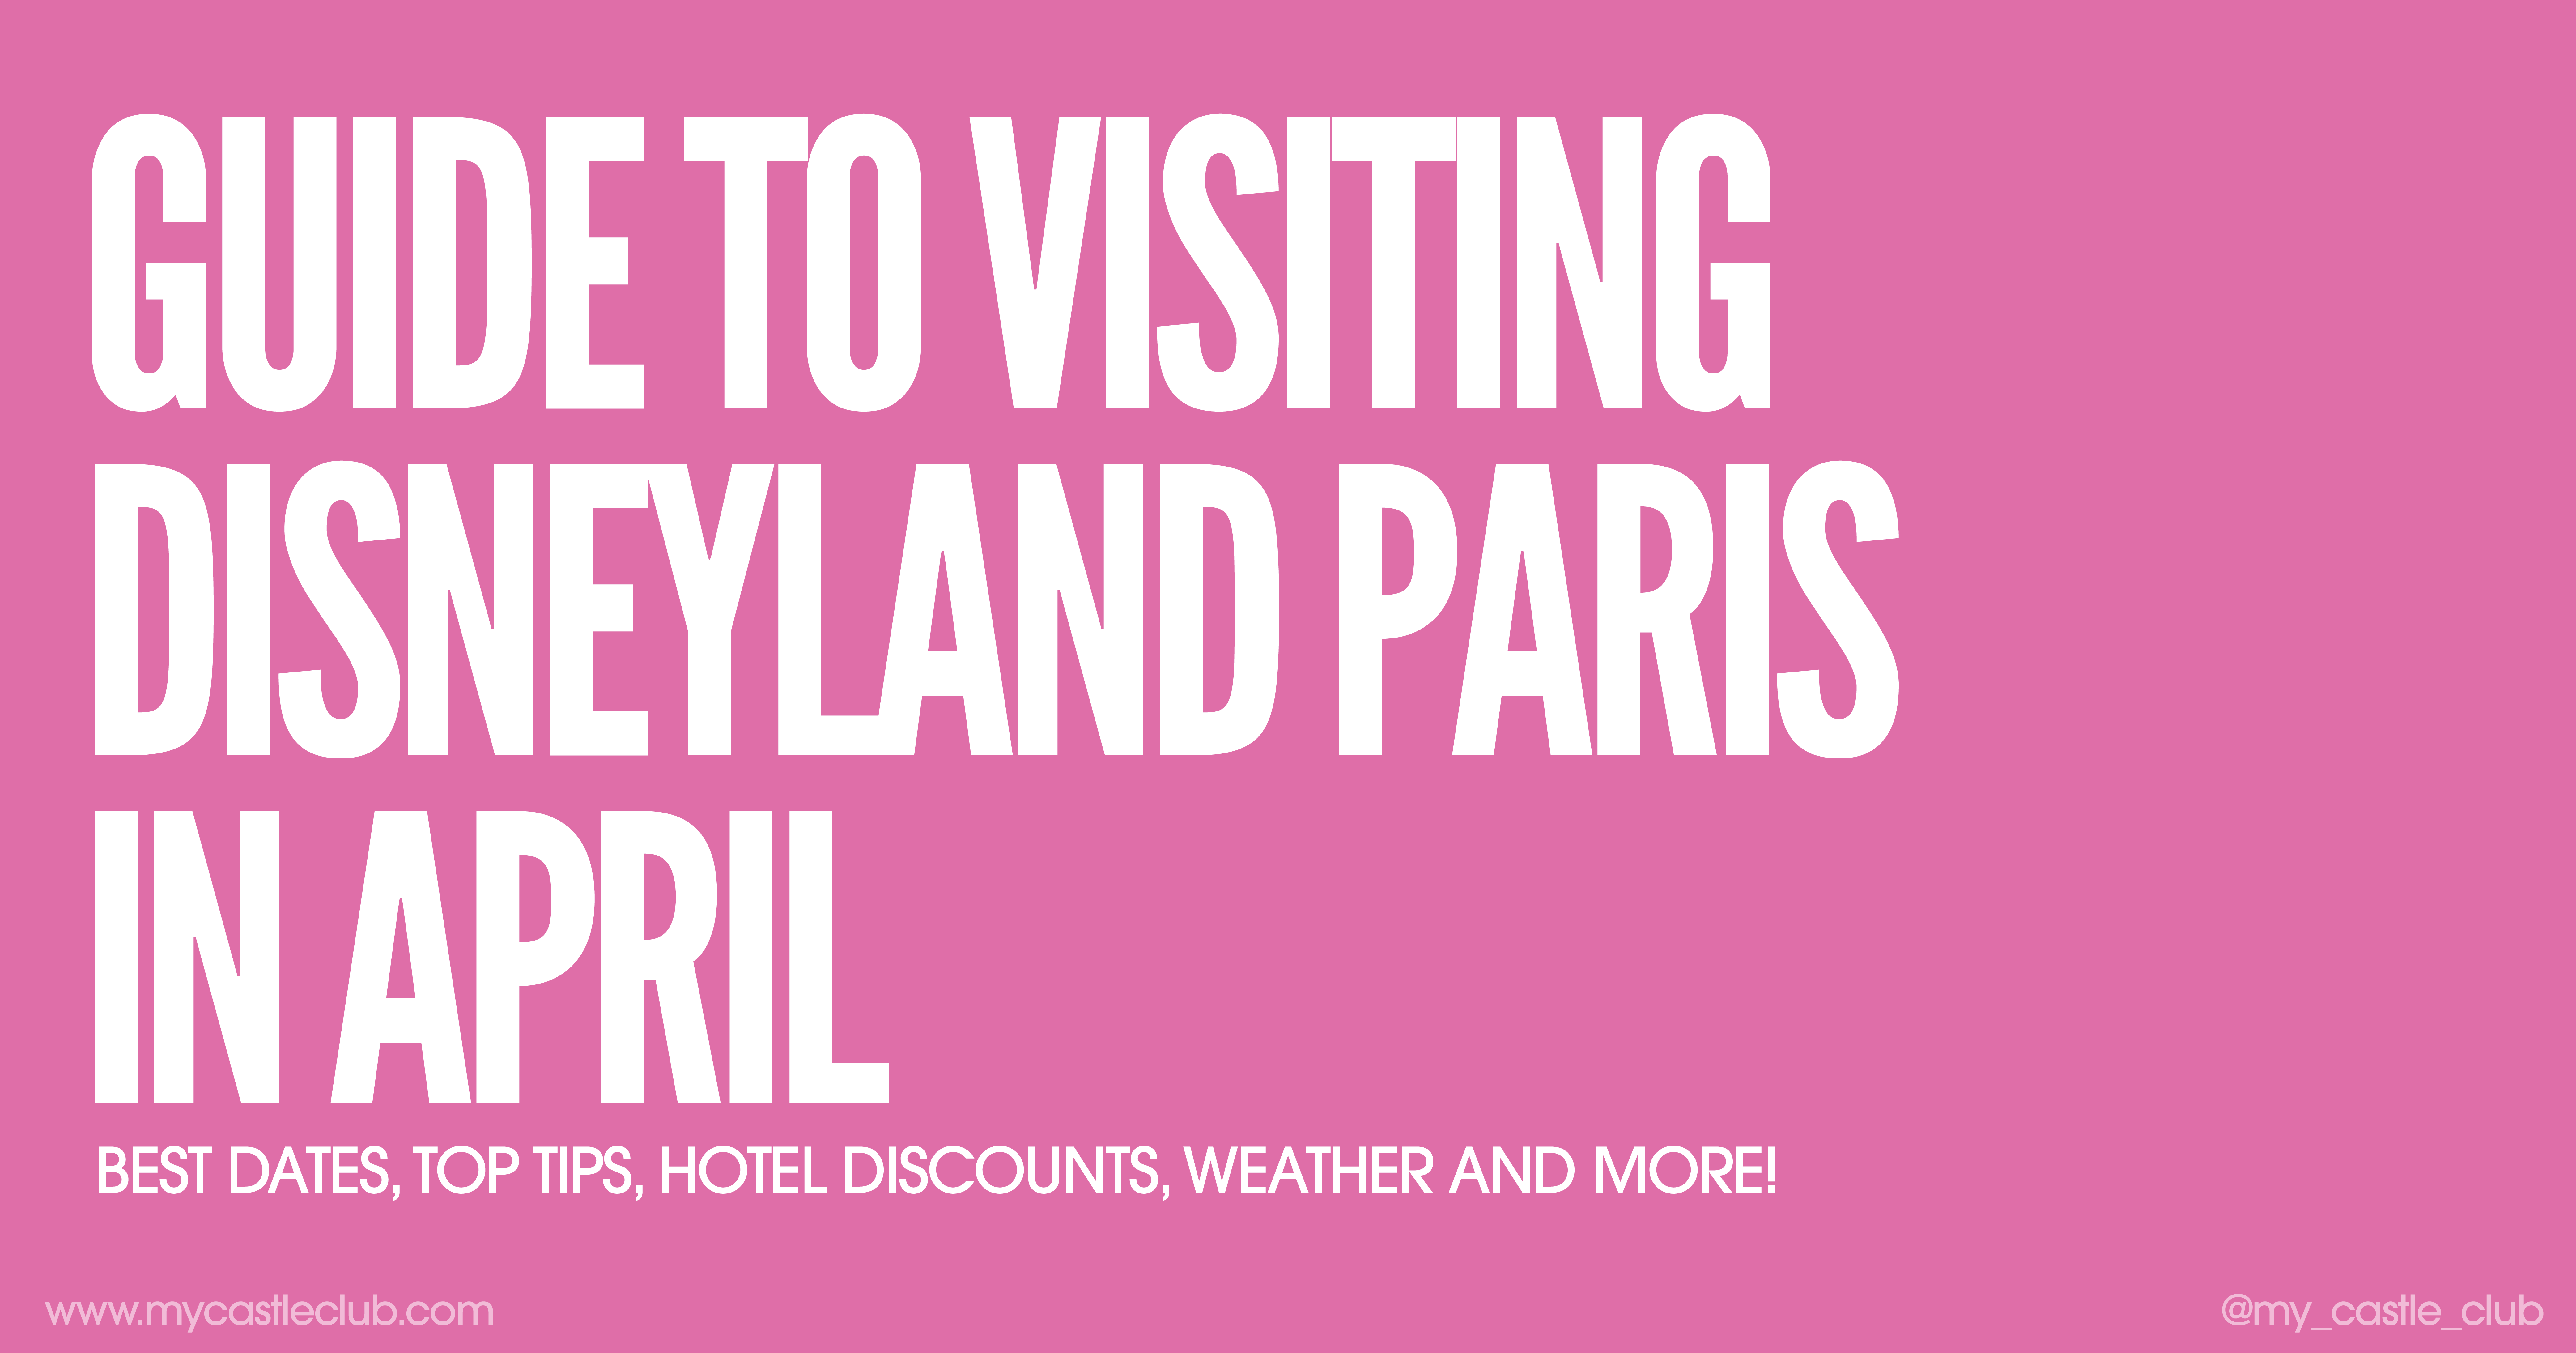 Visiting Disneyland Paris in April, Best Dates, Top Tips, Hotel Discounts, Weather and more!